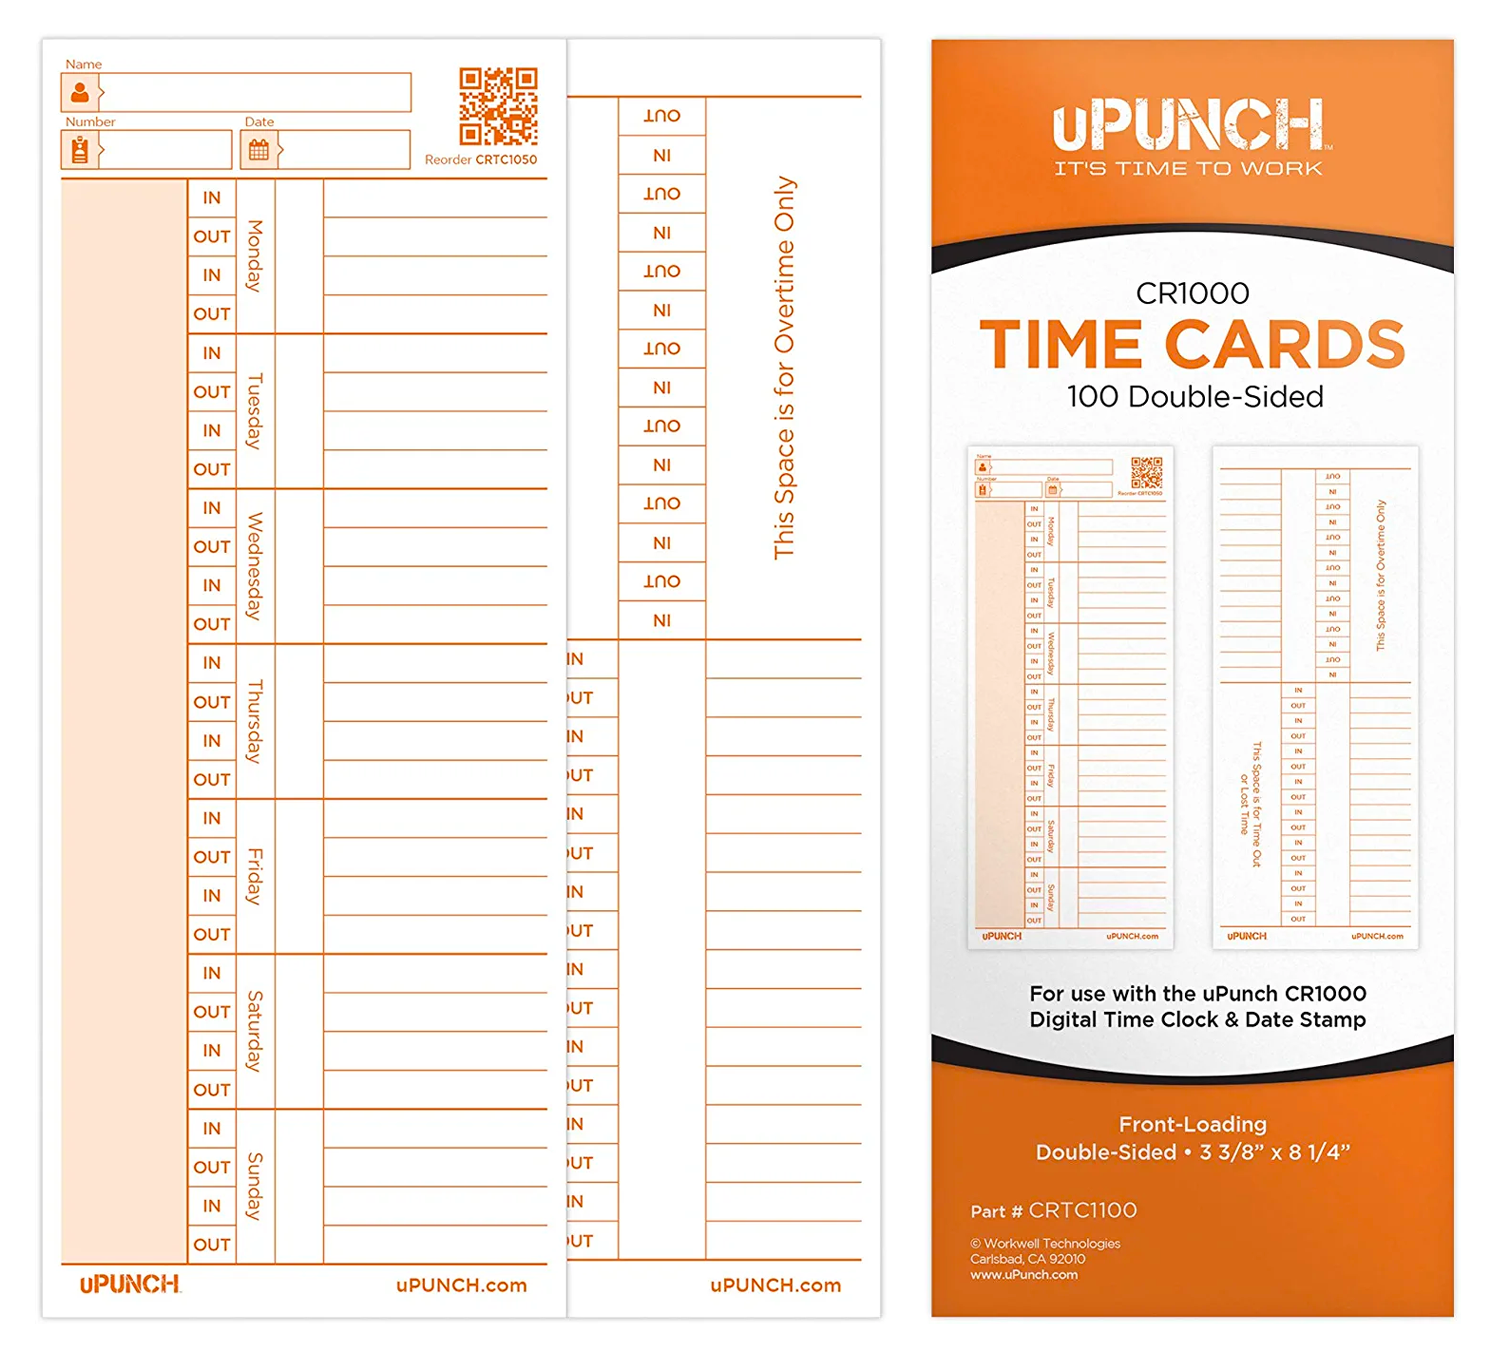 uPunch CRTC1100 Time Cards for CR1000, 100 Pack